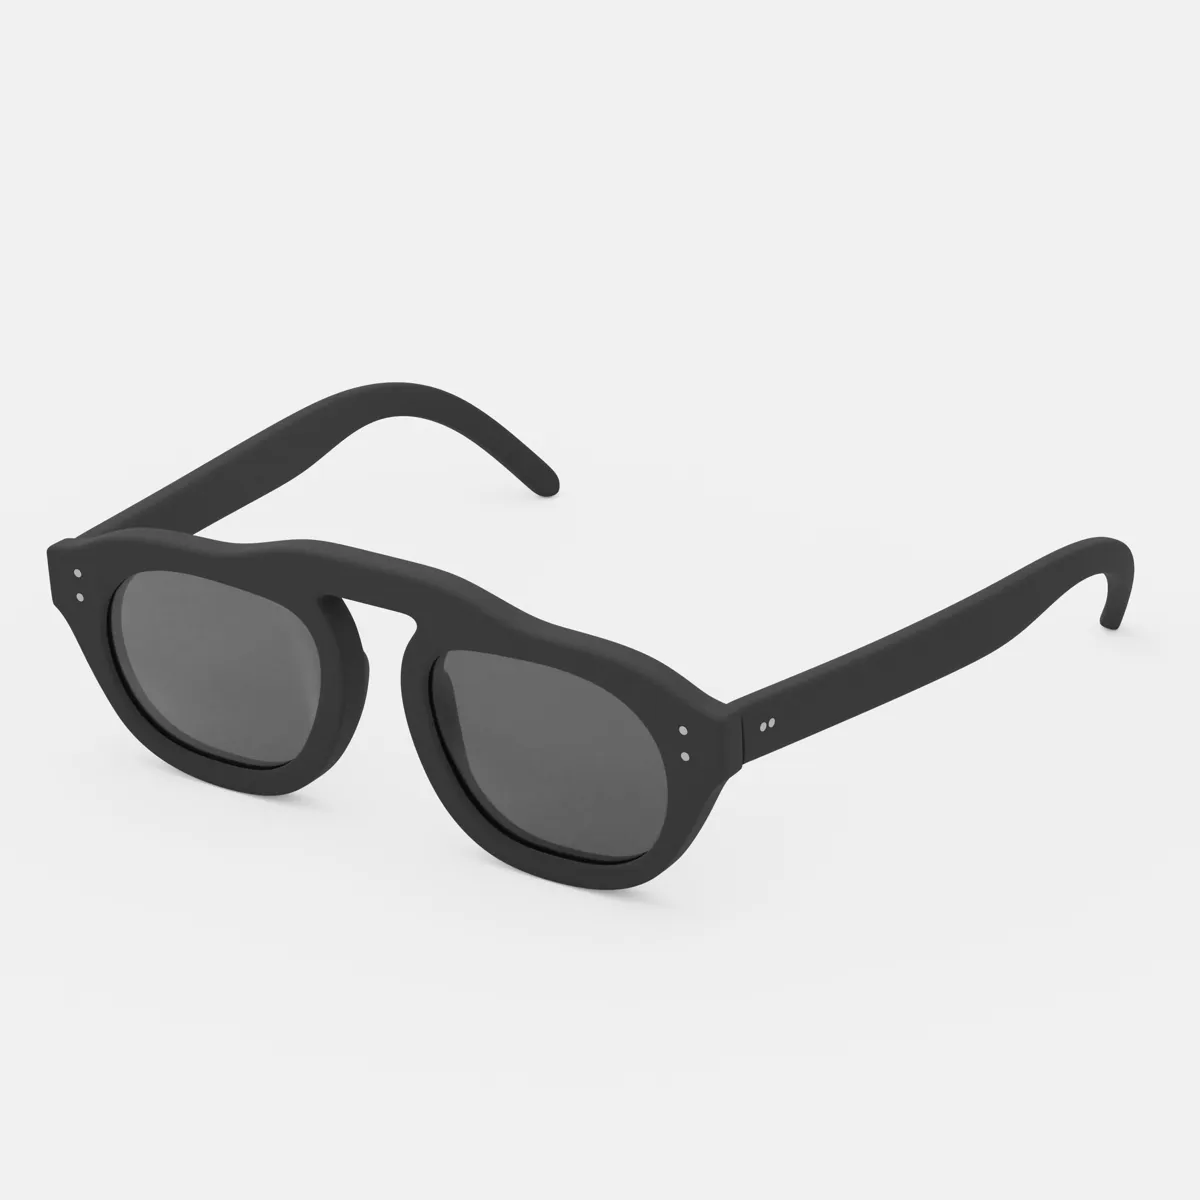 Plymouth Oval Sunglasses